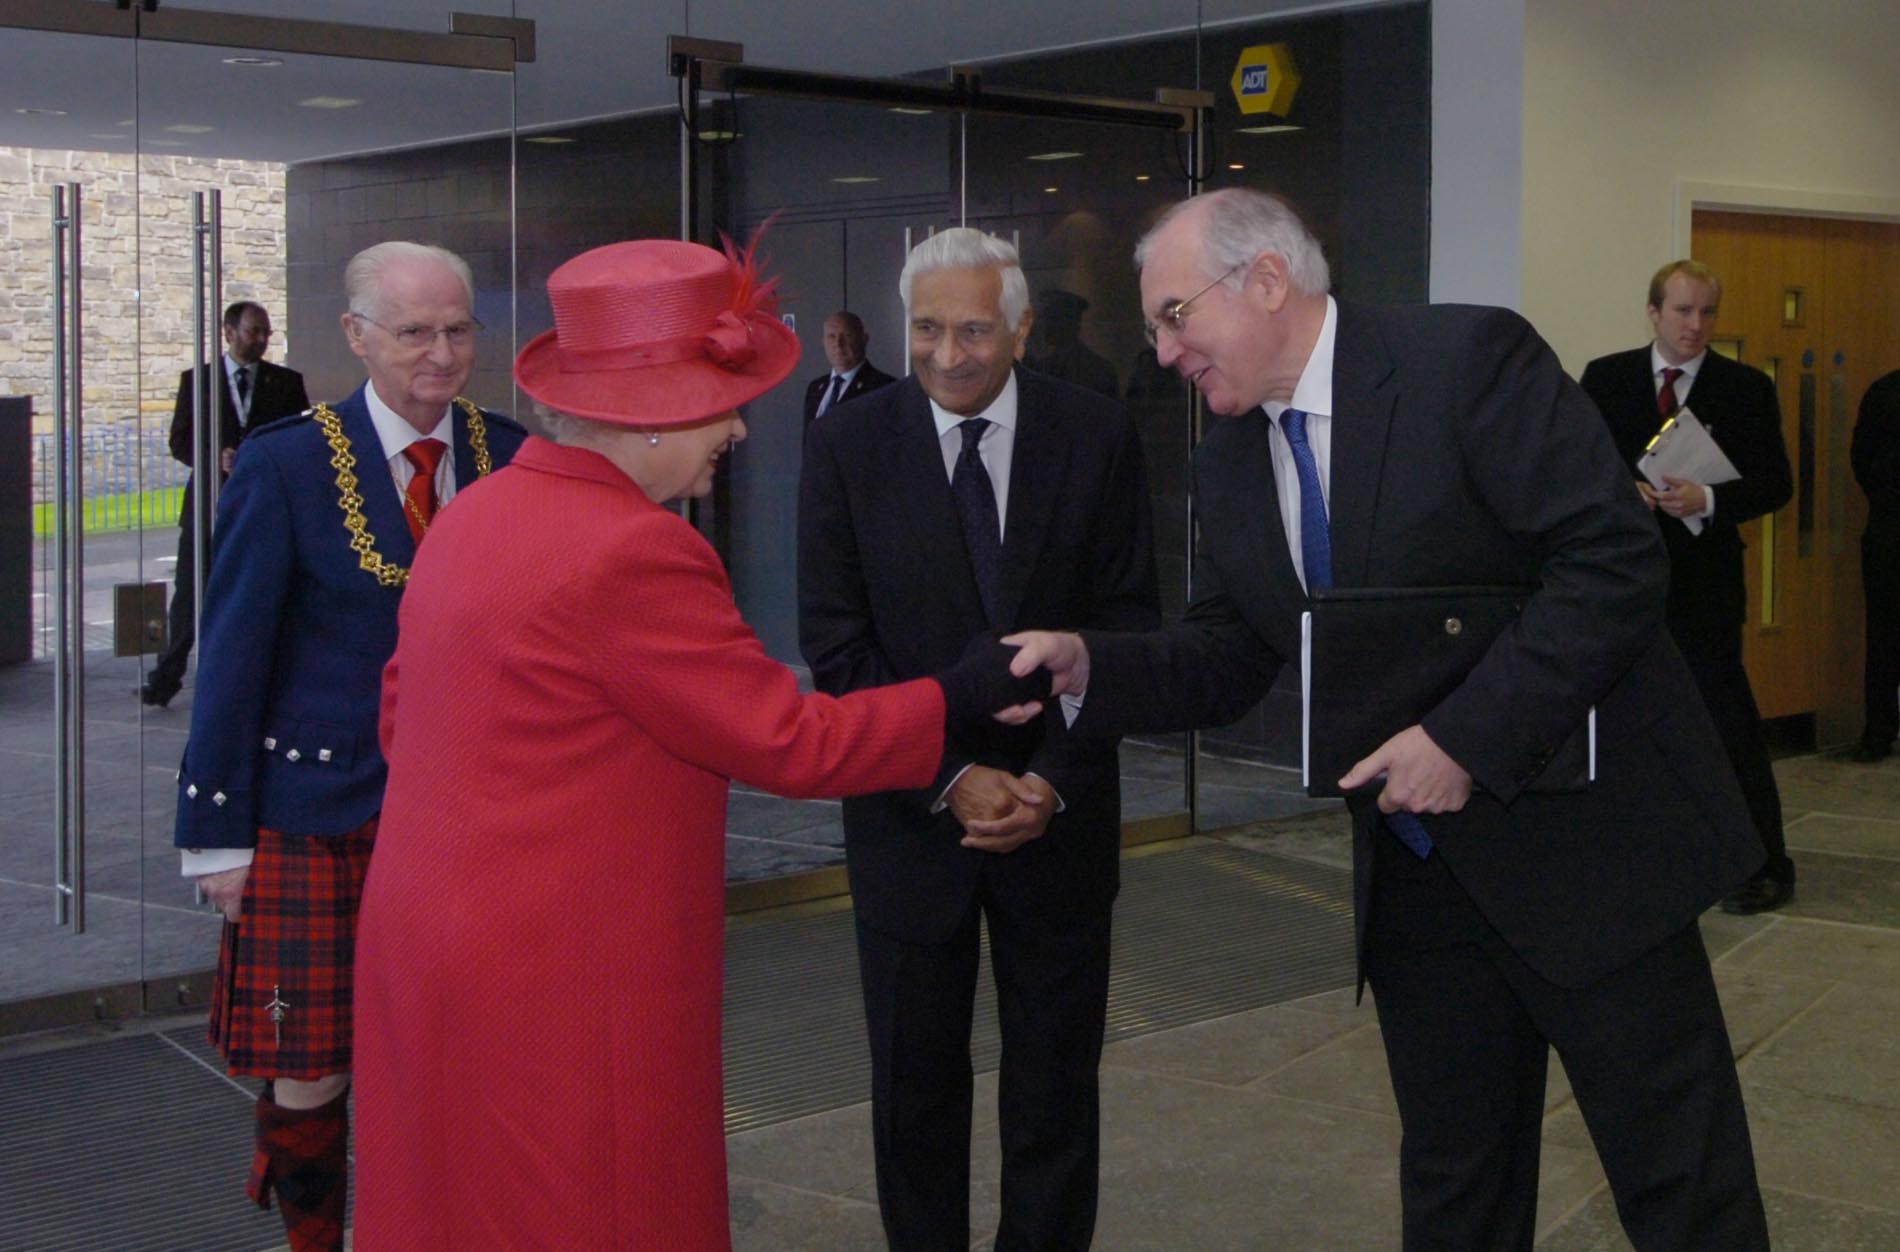 the Queen meeting the Chancellor and the Principal